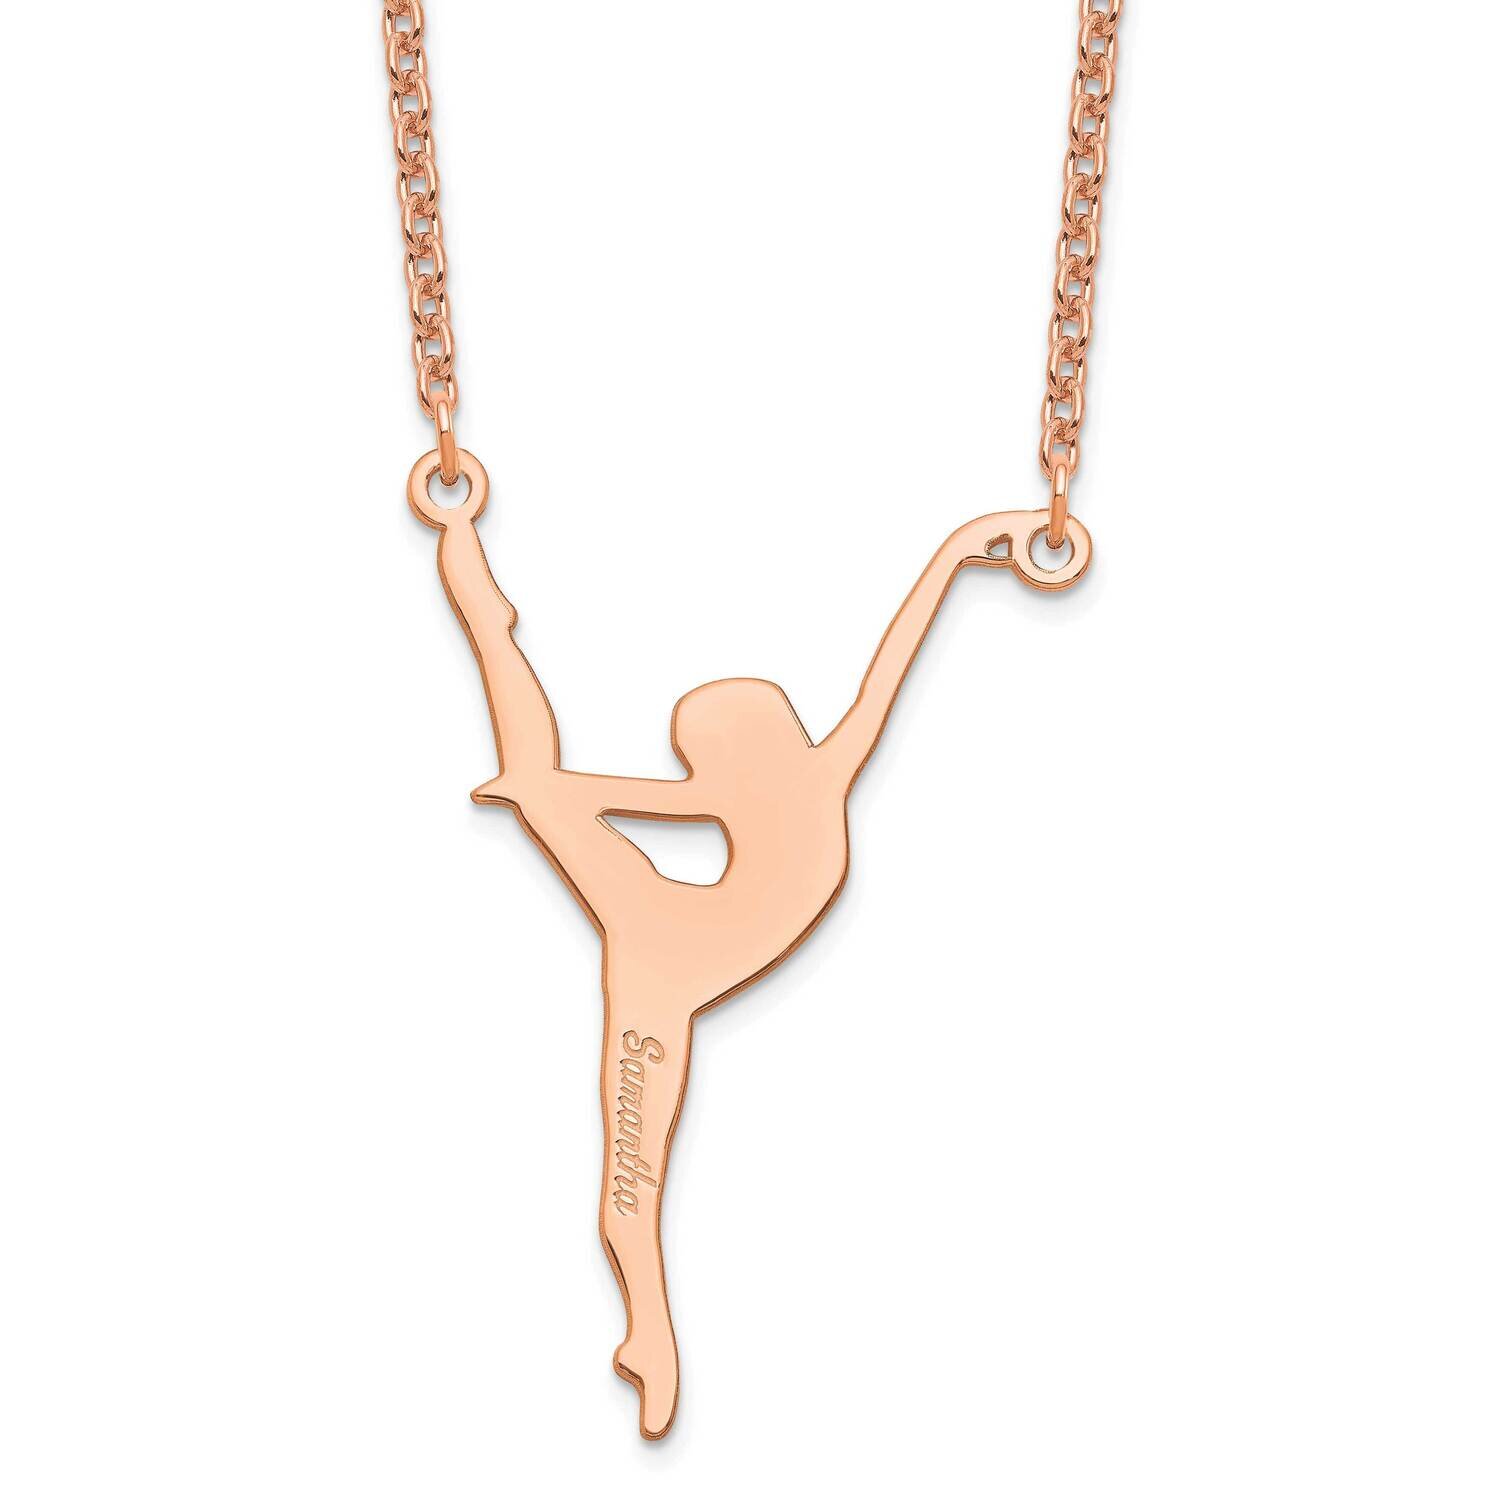 Personalized Dancer Necklace Sterling Silver Rose-plated XNA700RP